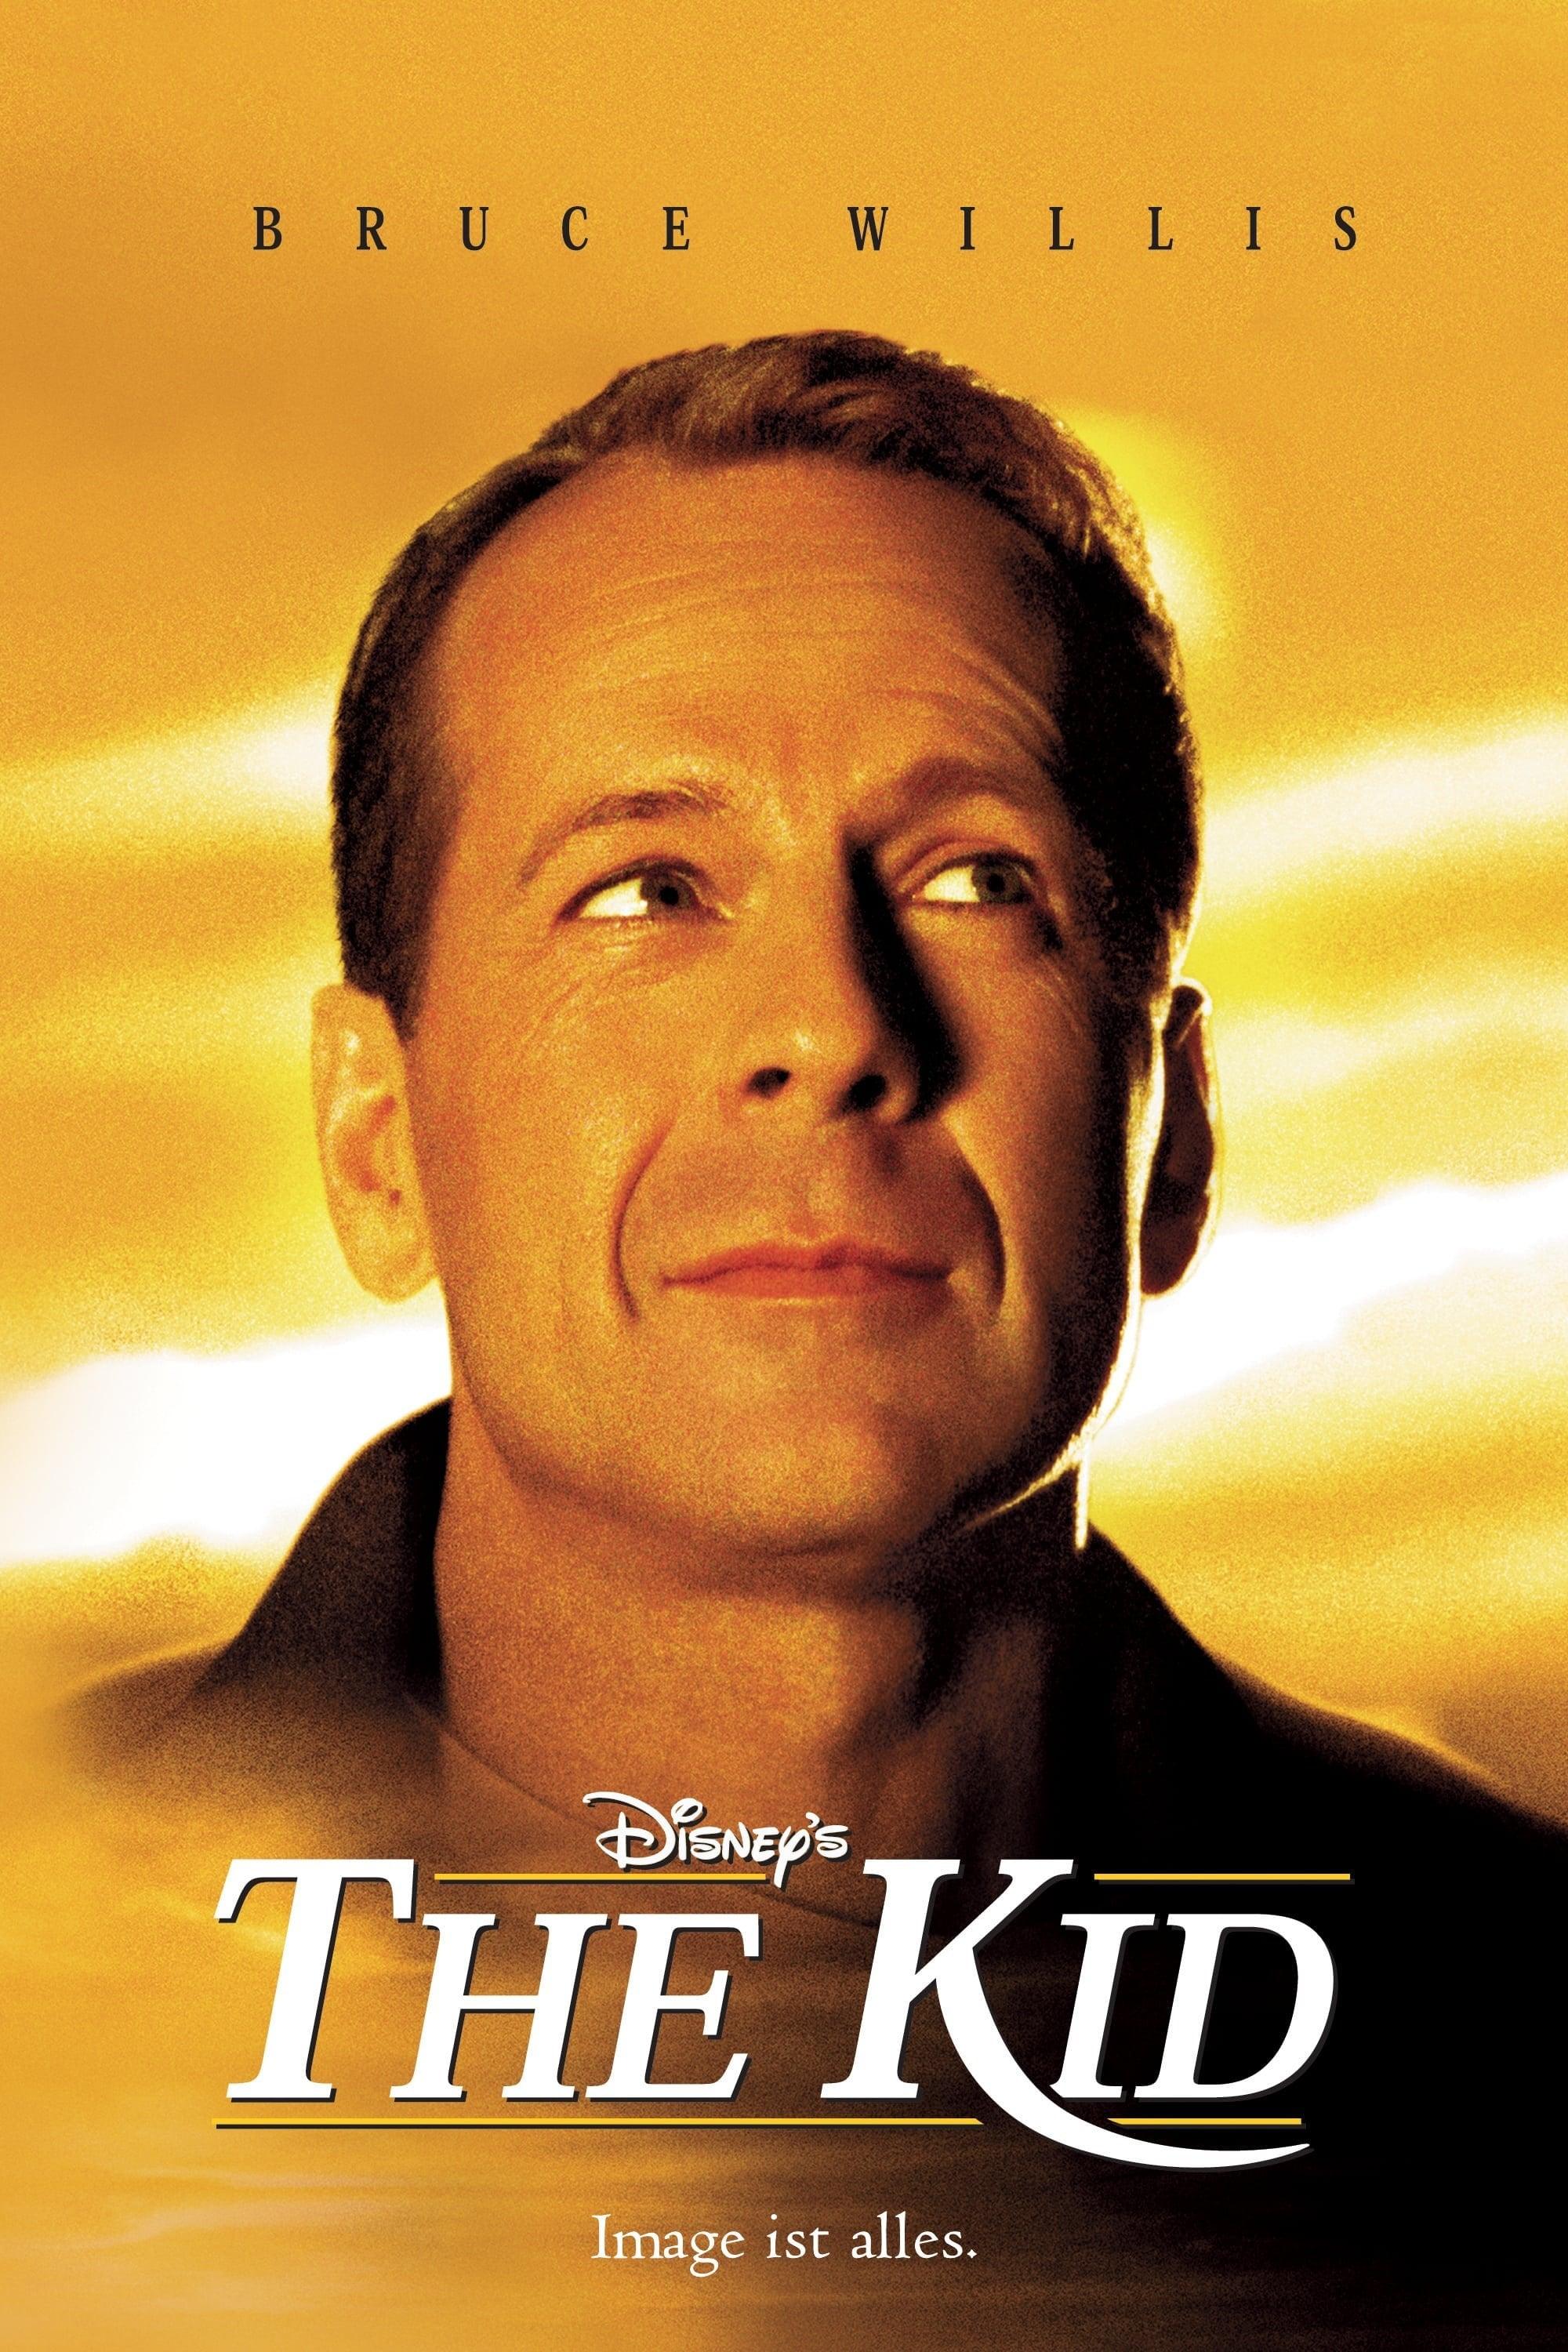 The Kid - Image ist alles poster